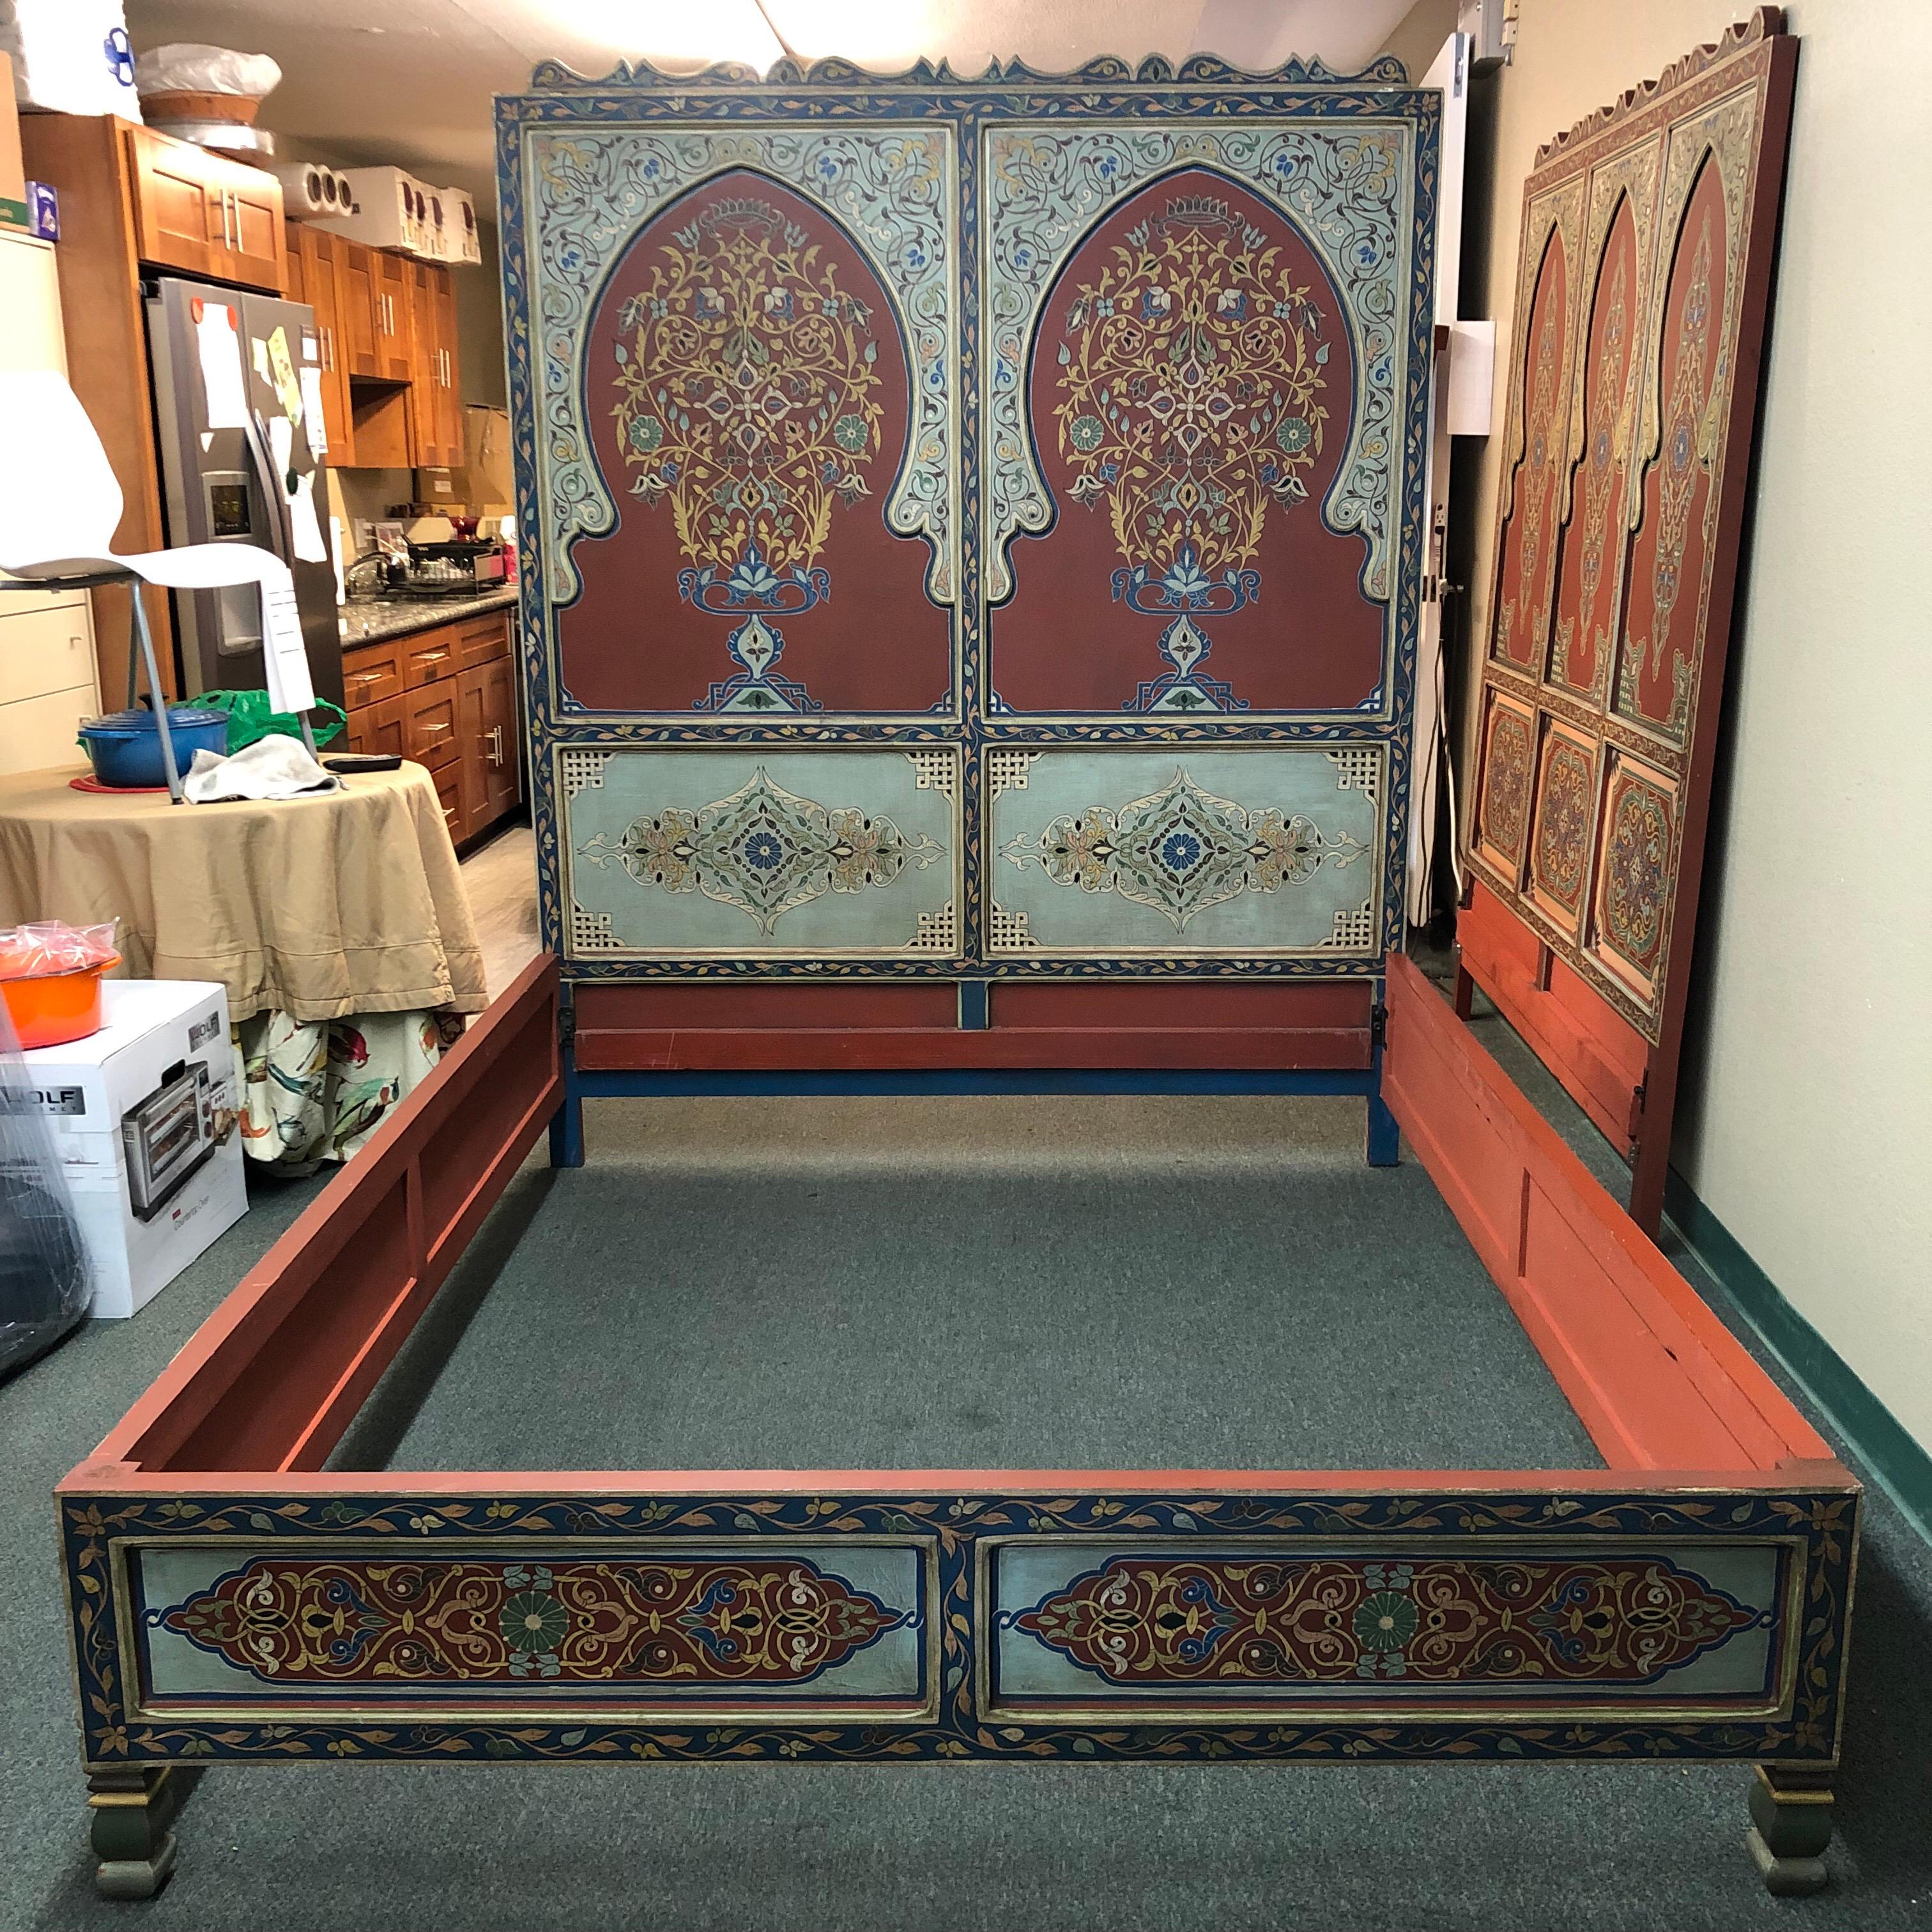 Stunning custom bedroom set, handcrafted in Morocco. Referencing traditional carved elements and rich colors of the country, the queen bed frame and pair of nightstands are an exotic delight that transports one to another time and place. A pair of